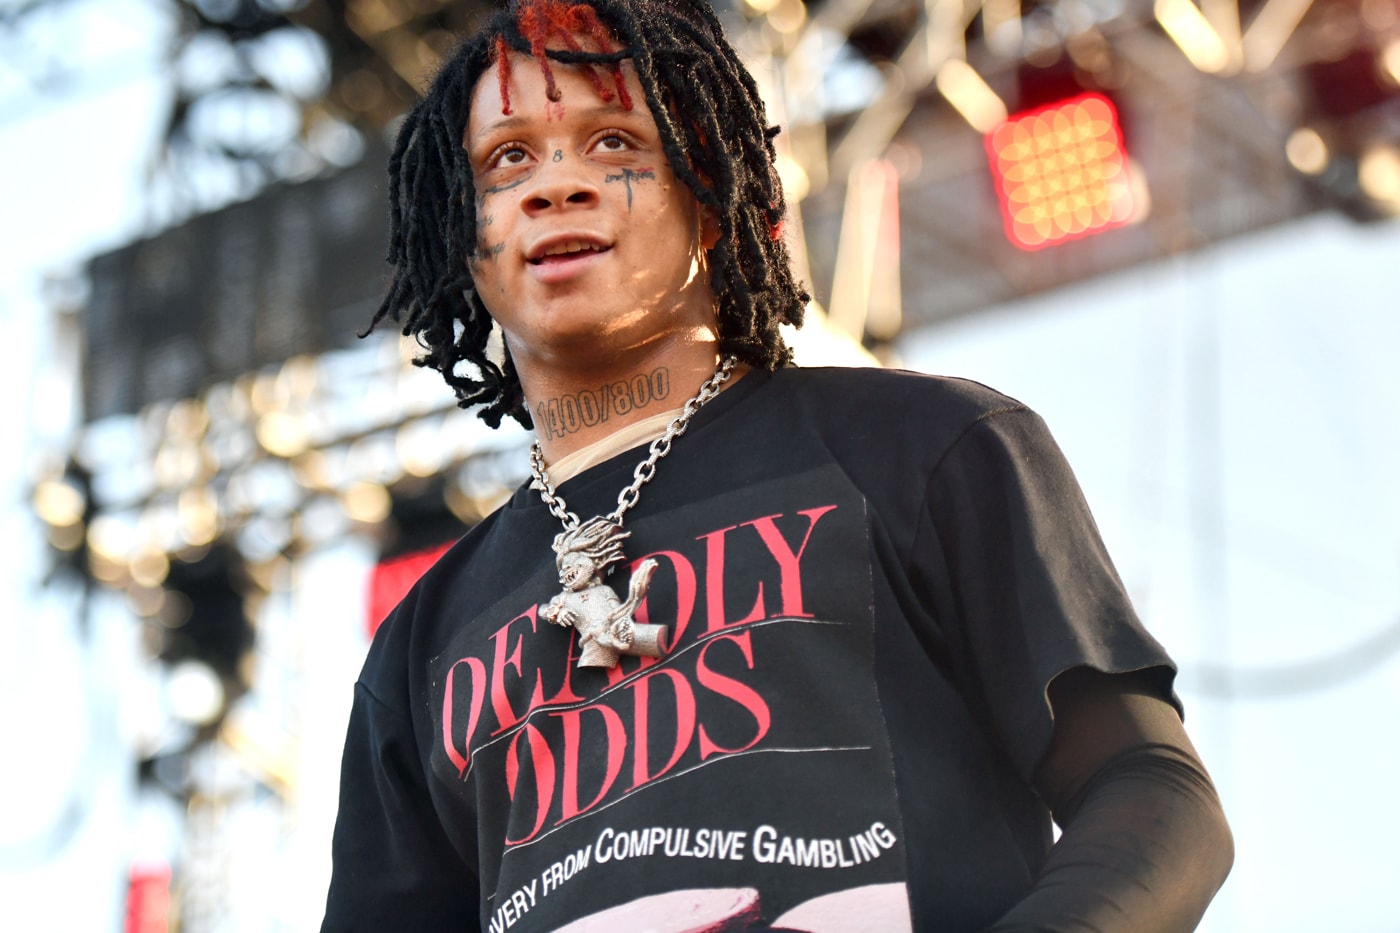 Trippie Redd A Love Letter to You 4 Number 1 Billboard 200 Debut Projection 2019 New Music Track Songs 